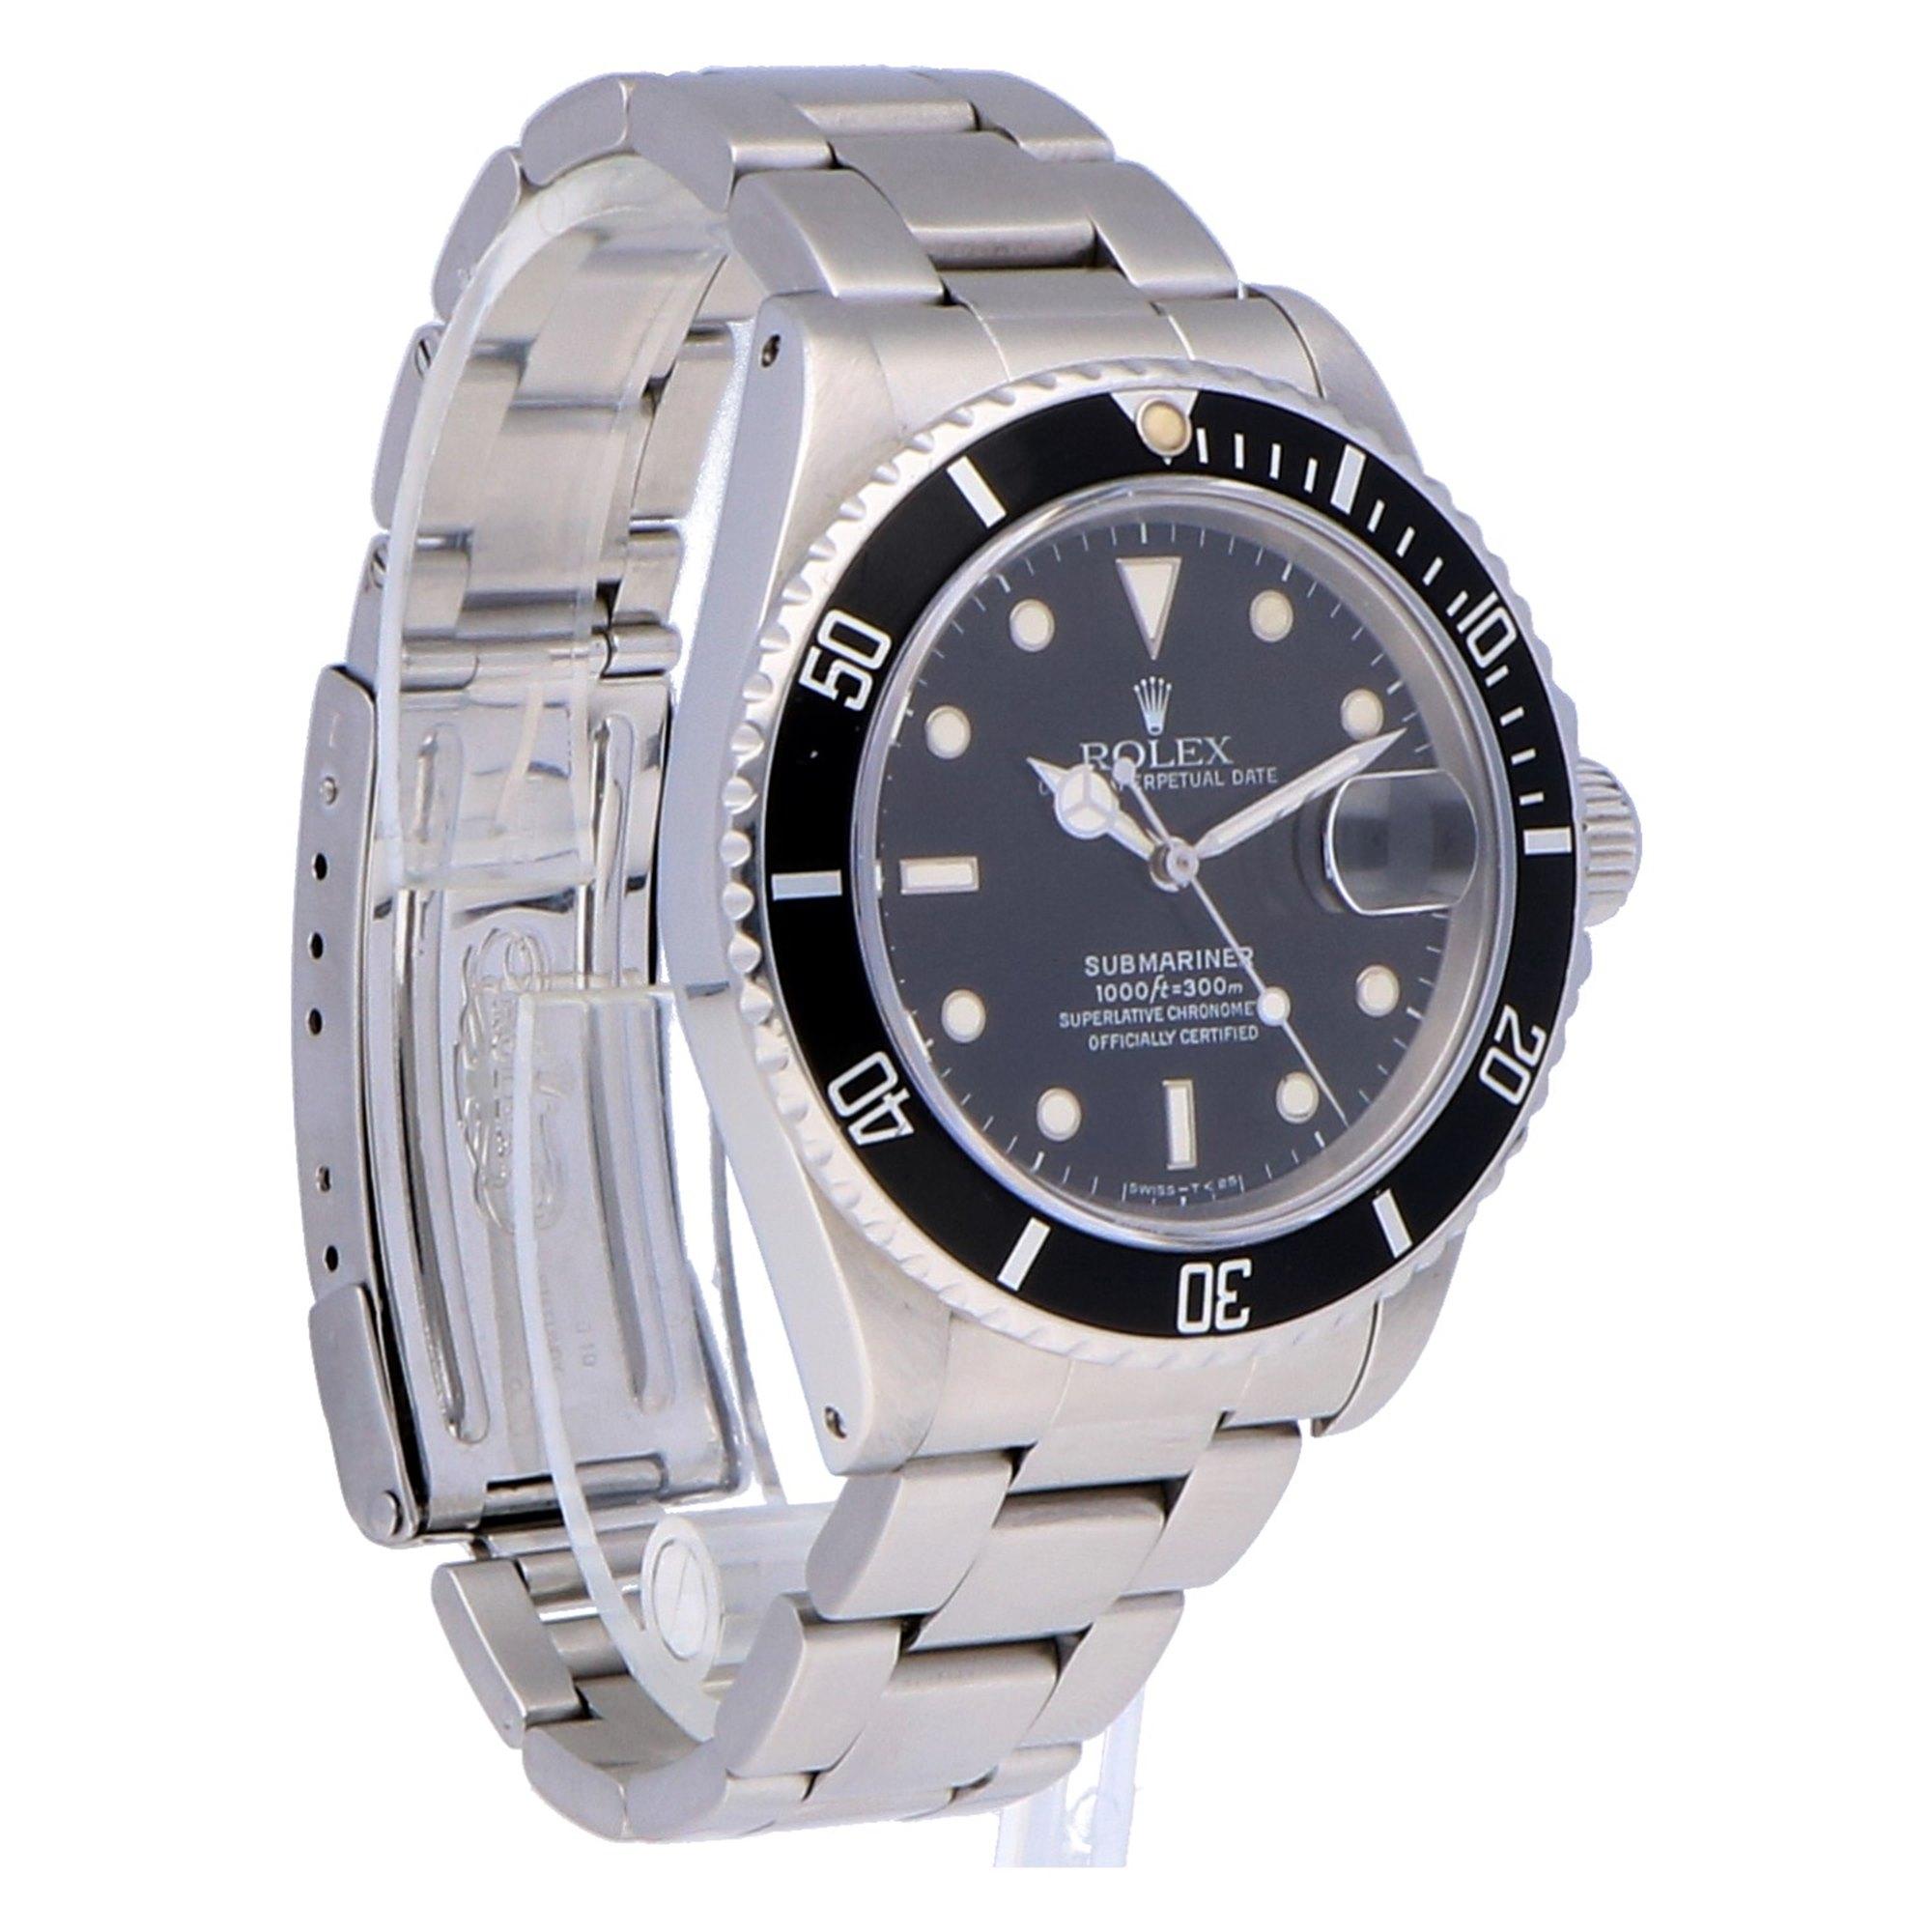 Pre-Owned Rolex Submariner Date Stainless Steel 16800 Watch 3